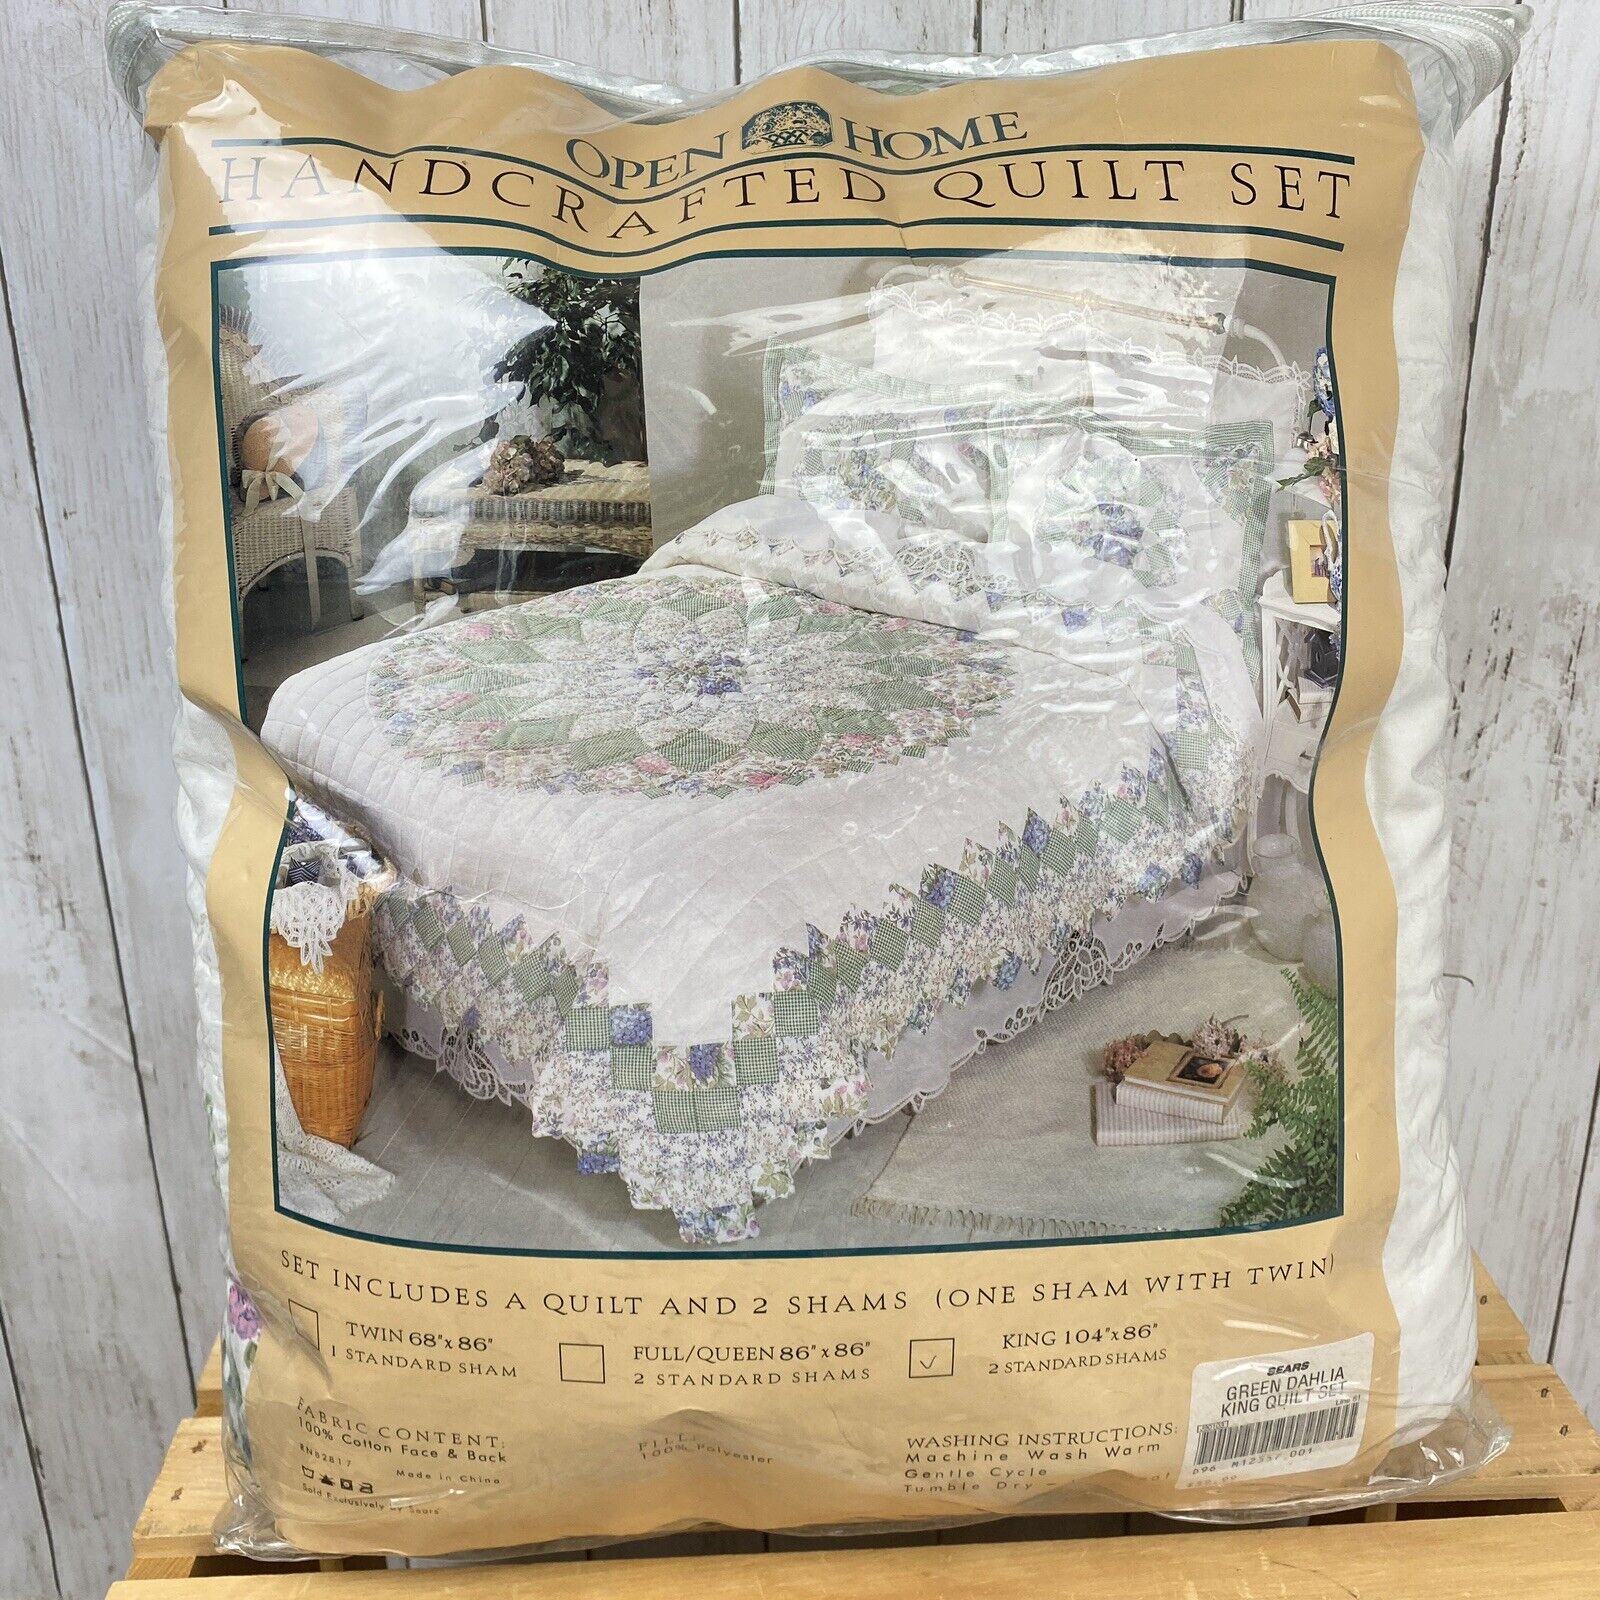 Open Home Sears Vintage Shabby Chic Floral Patchwork Handcrafted King Quilt Set